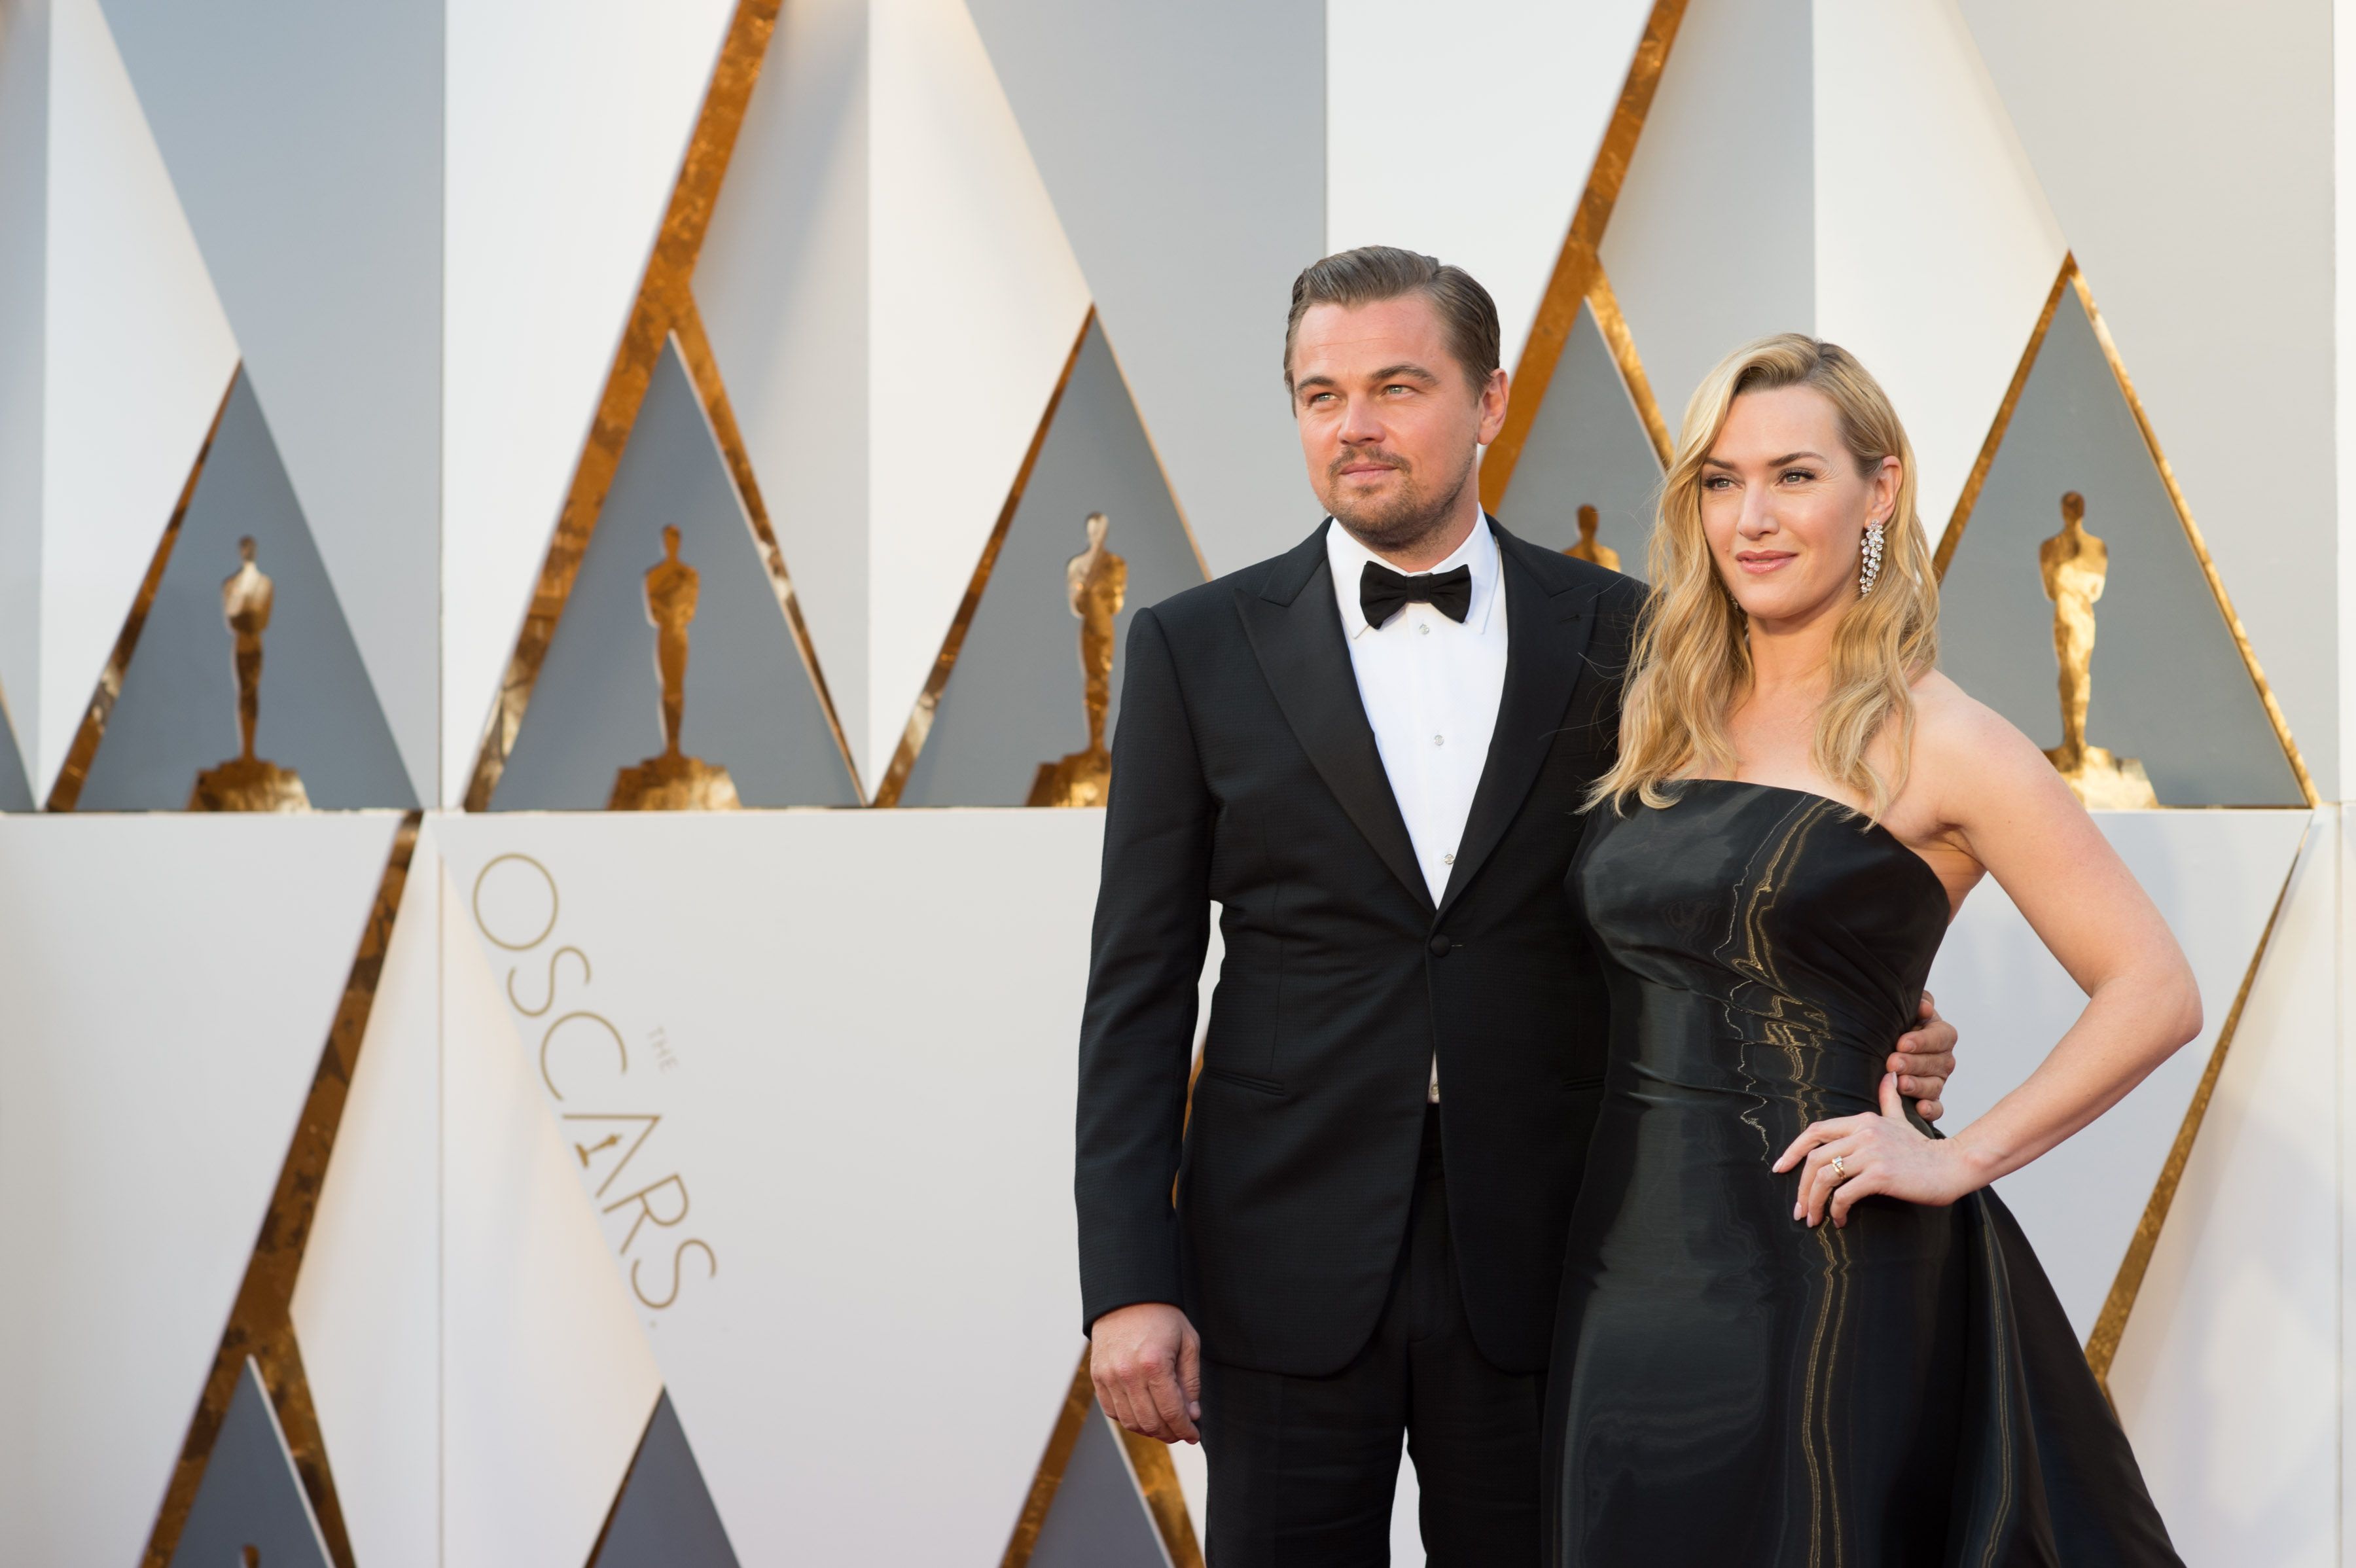 What Does Kate Winslet Think Of Leonardo DiCaprio’s Controversial Dating History?